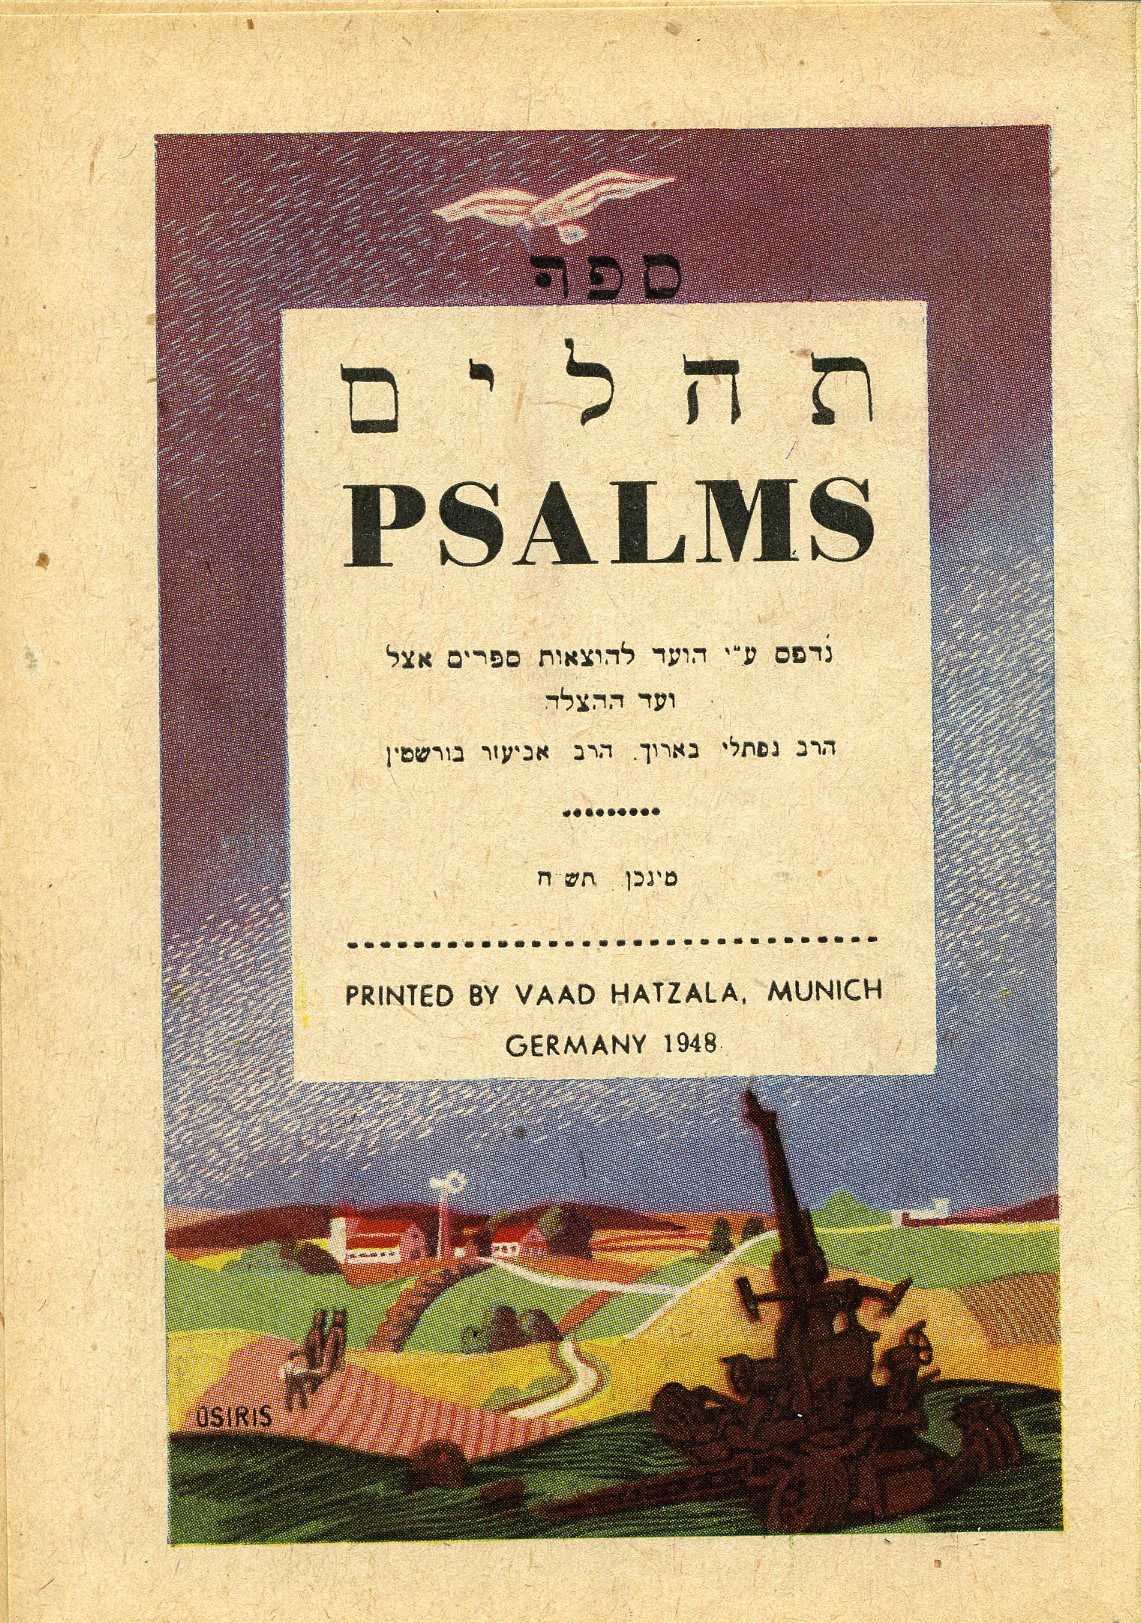 VAAD Hatzala Psalm Edition for Displaced Persons